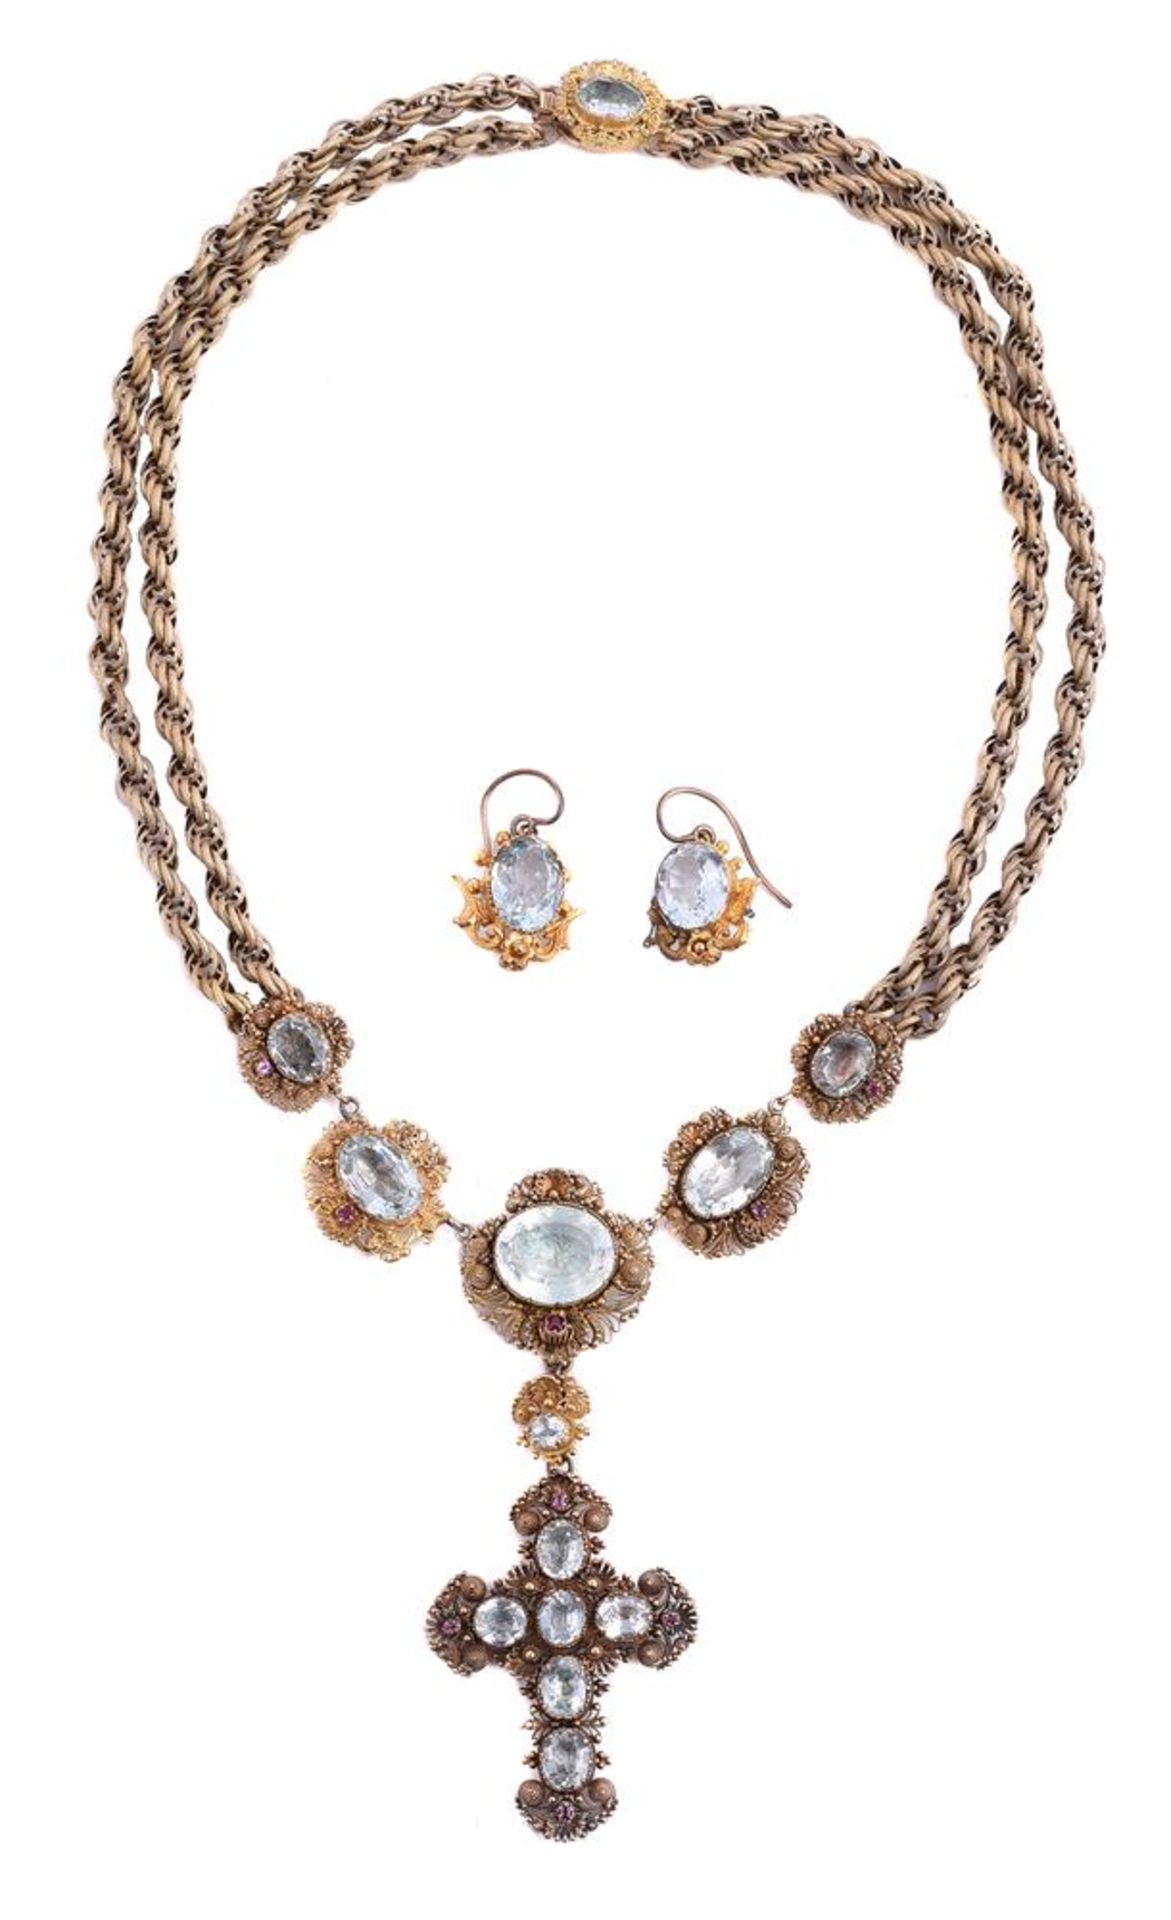 AN 1830S CANNETILLE AQUAMARINE AND RUBY NECKLACE